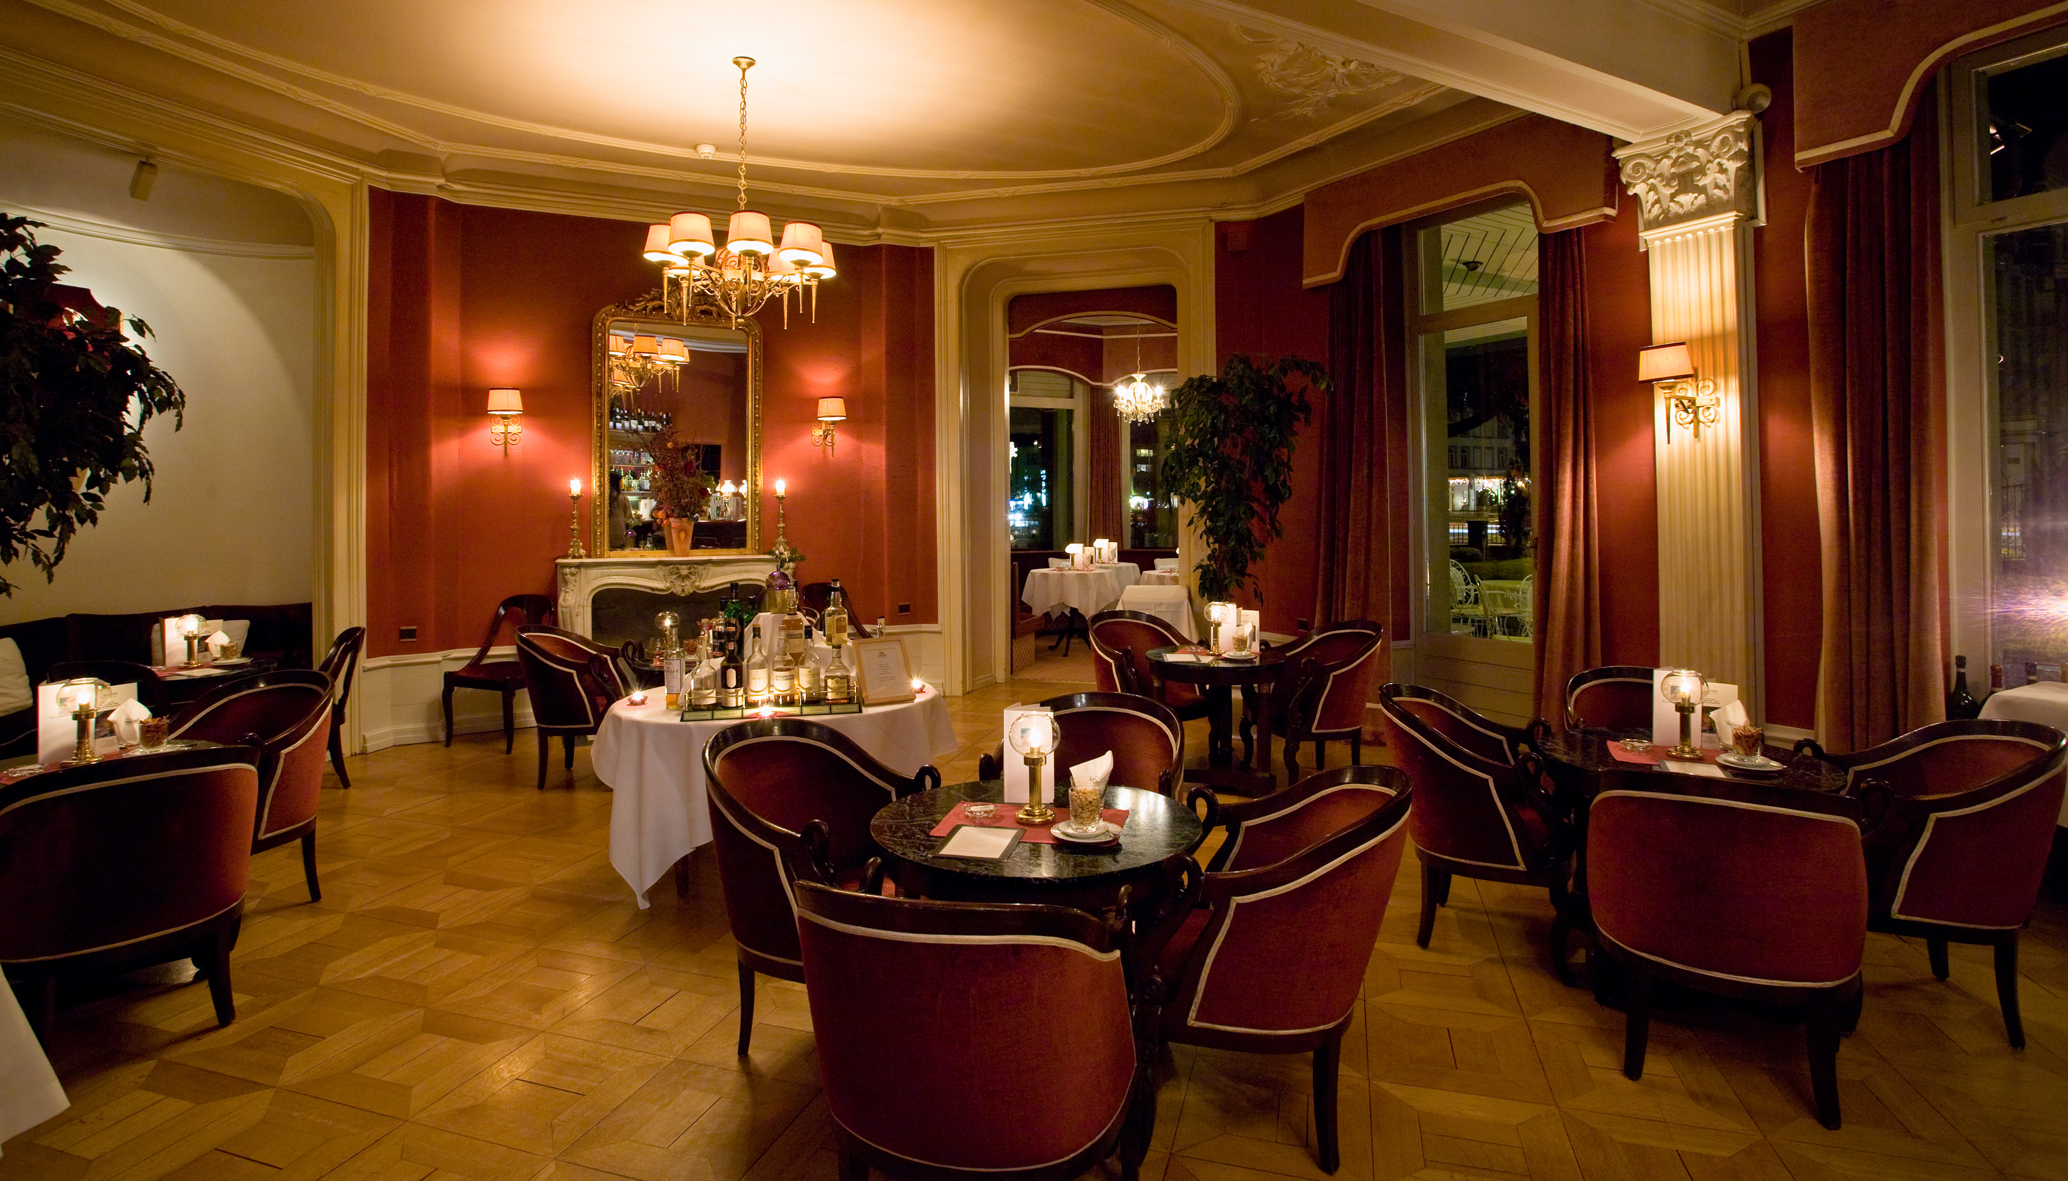 Hotelbar Le Vieux Rivage des Lindner Grand Hotel Beau Rivage in Interlaken.
